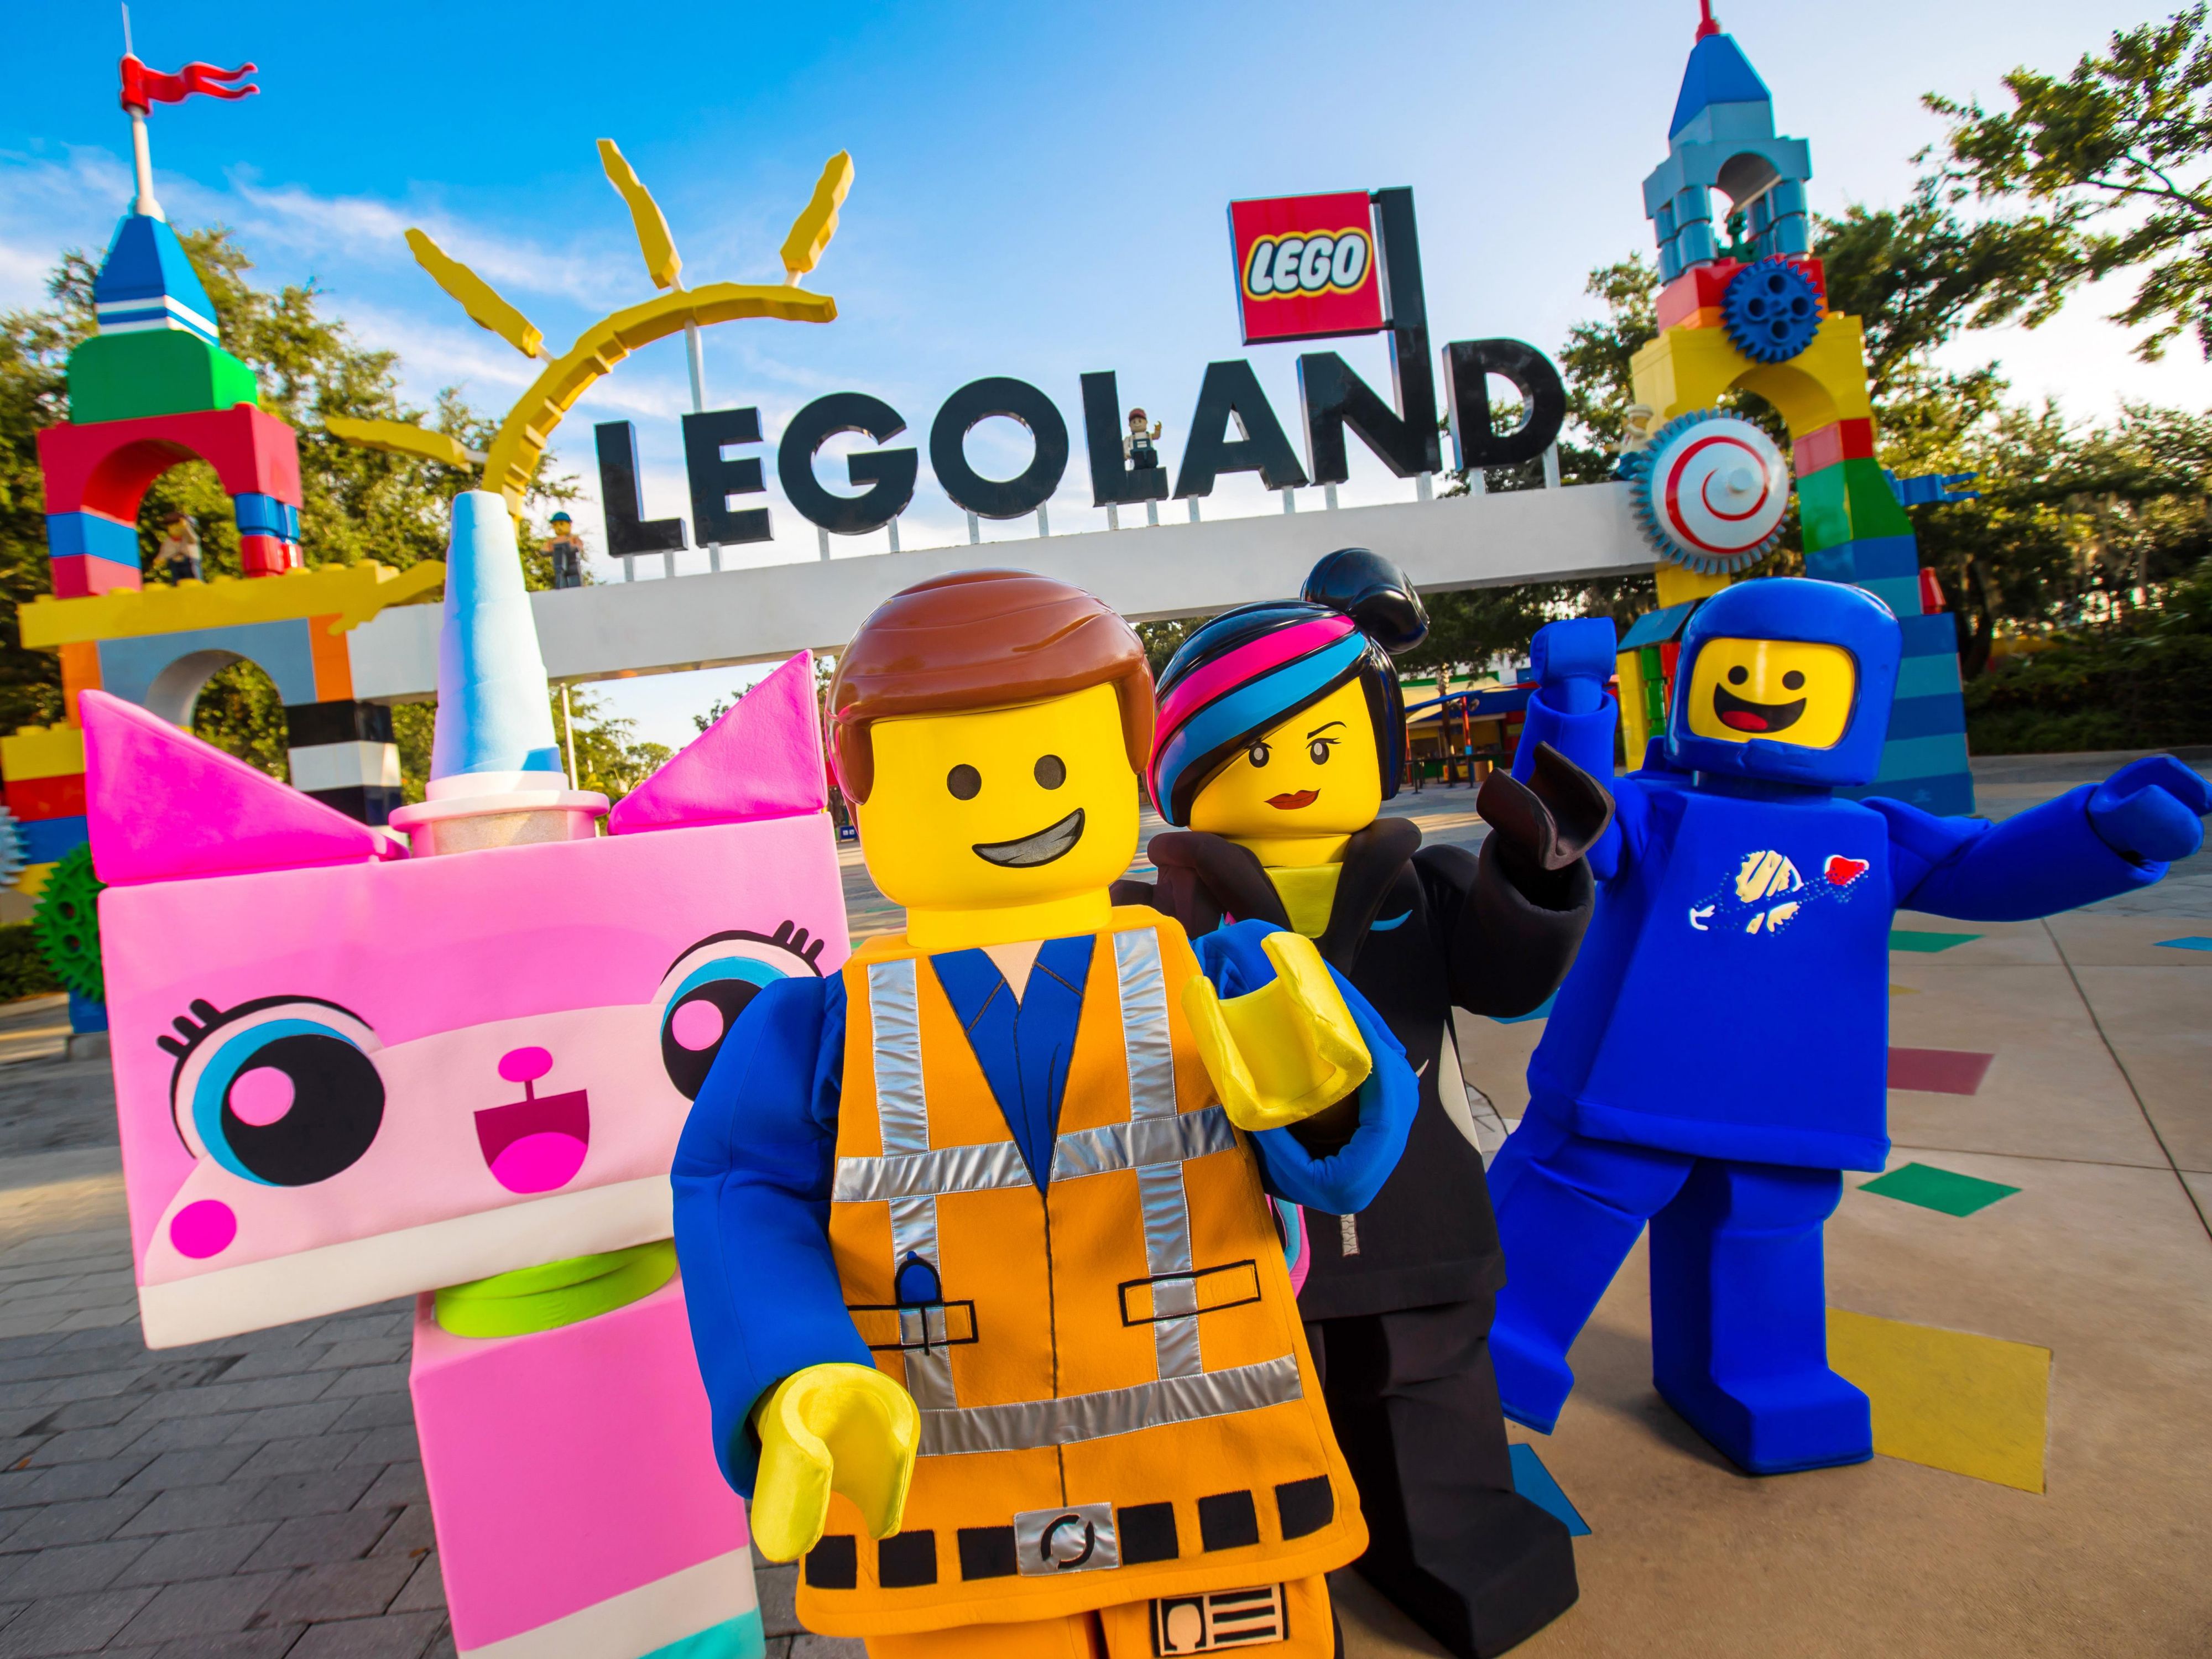 The "Land Without Limits where the Child is the Hero" is less than 10 minutes from the hotel. LEGOLAND® California Resort is located in Carlsbad - just down Interstate-5 and discounted tickets are available from the hotel front desk. Adventure-seekers under the age of 12 eat for free with paying adults in our hotel restaurant.